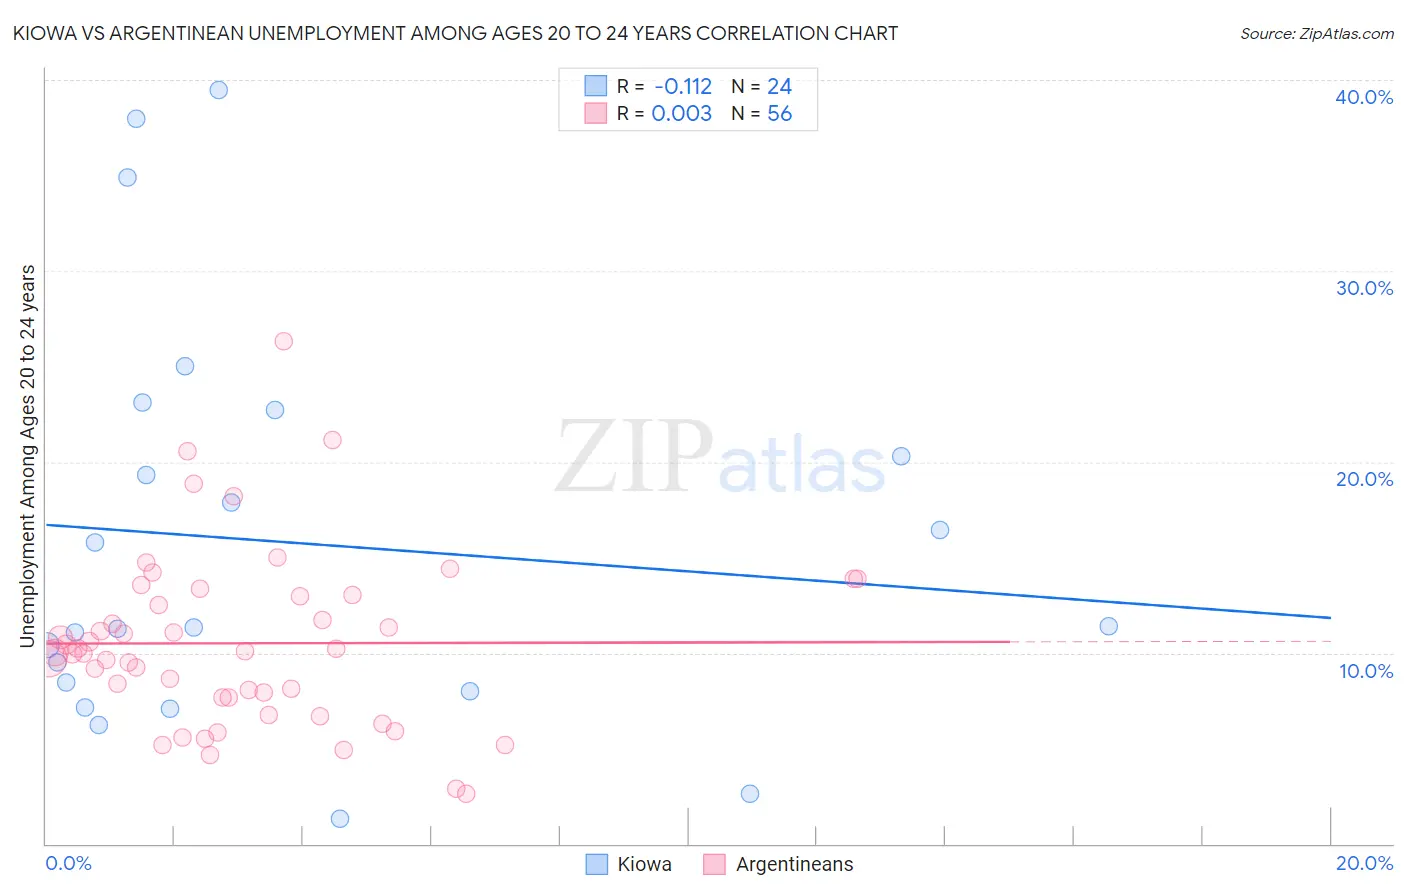 Kiowa vs Argentinean Unemployment Among Ages 20 to 24 years